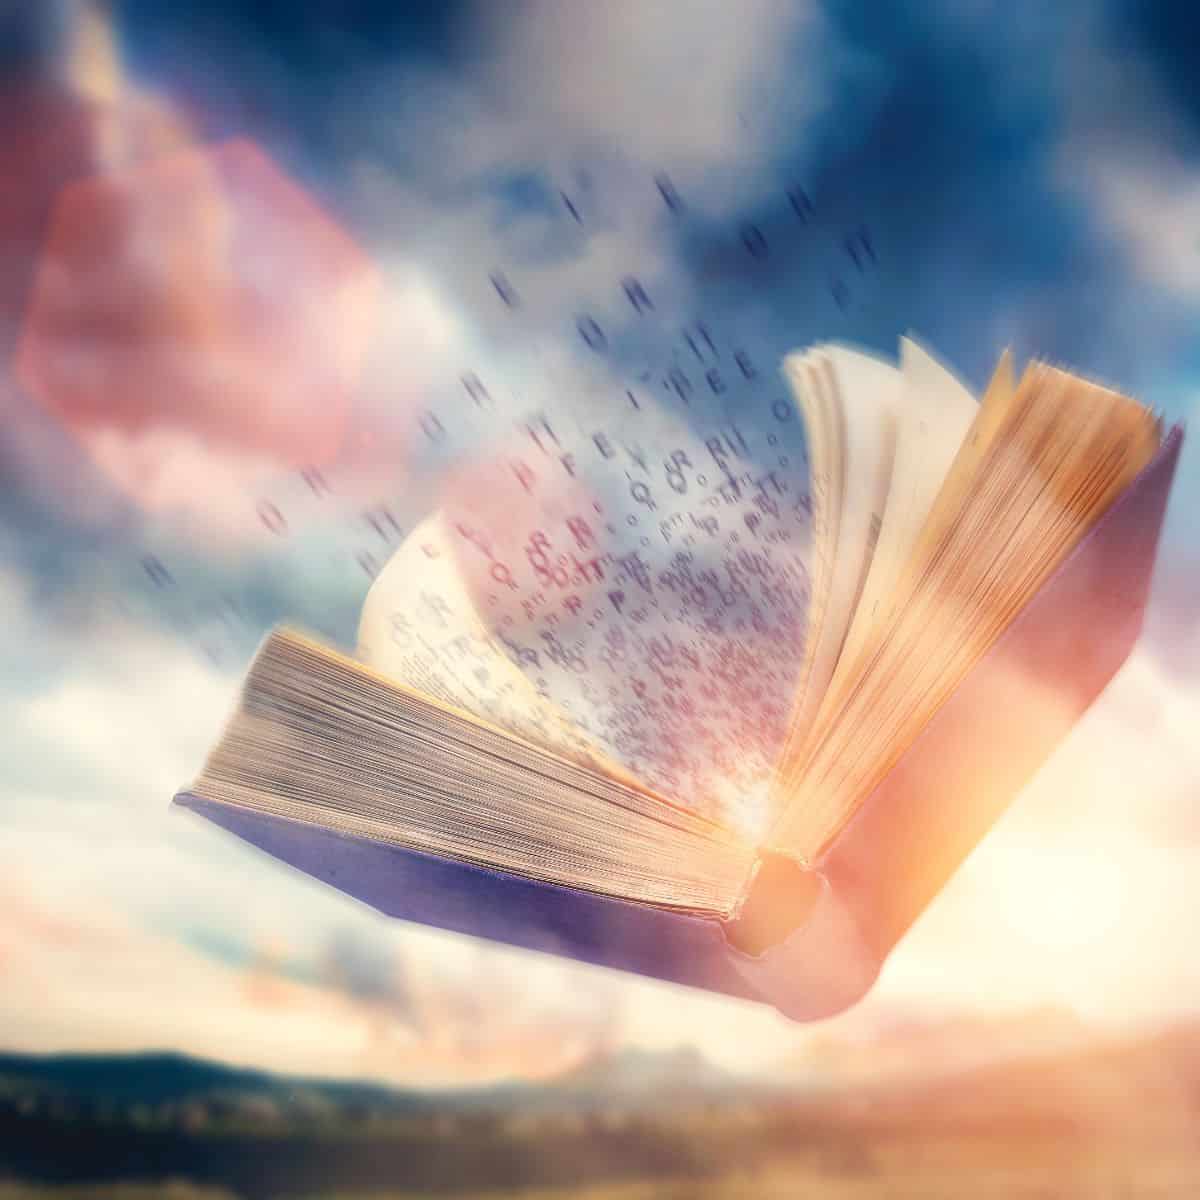 open book in front on clouds and light.